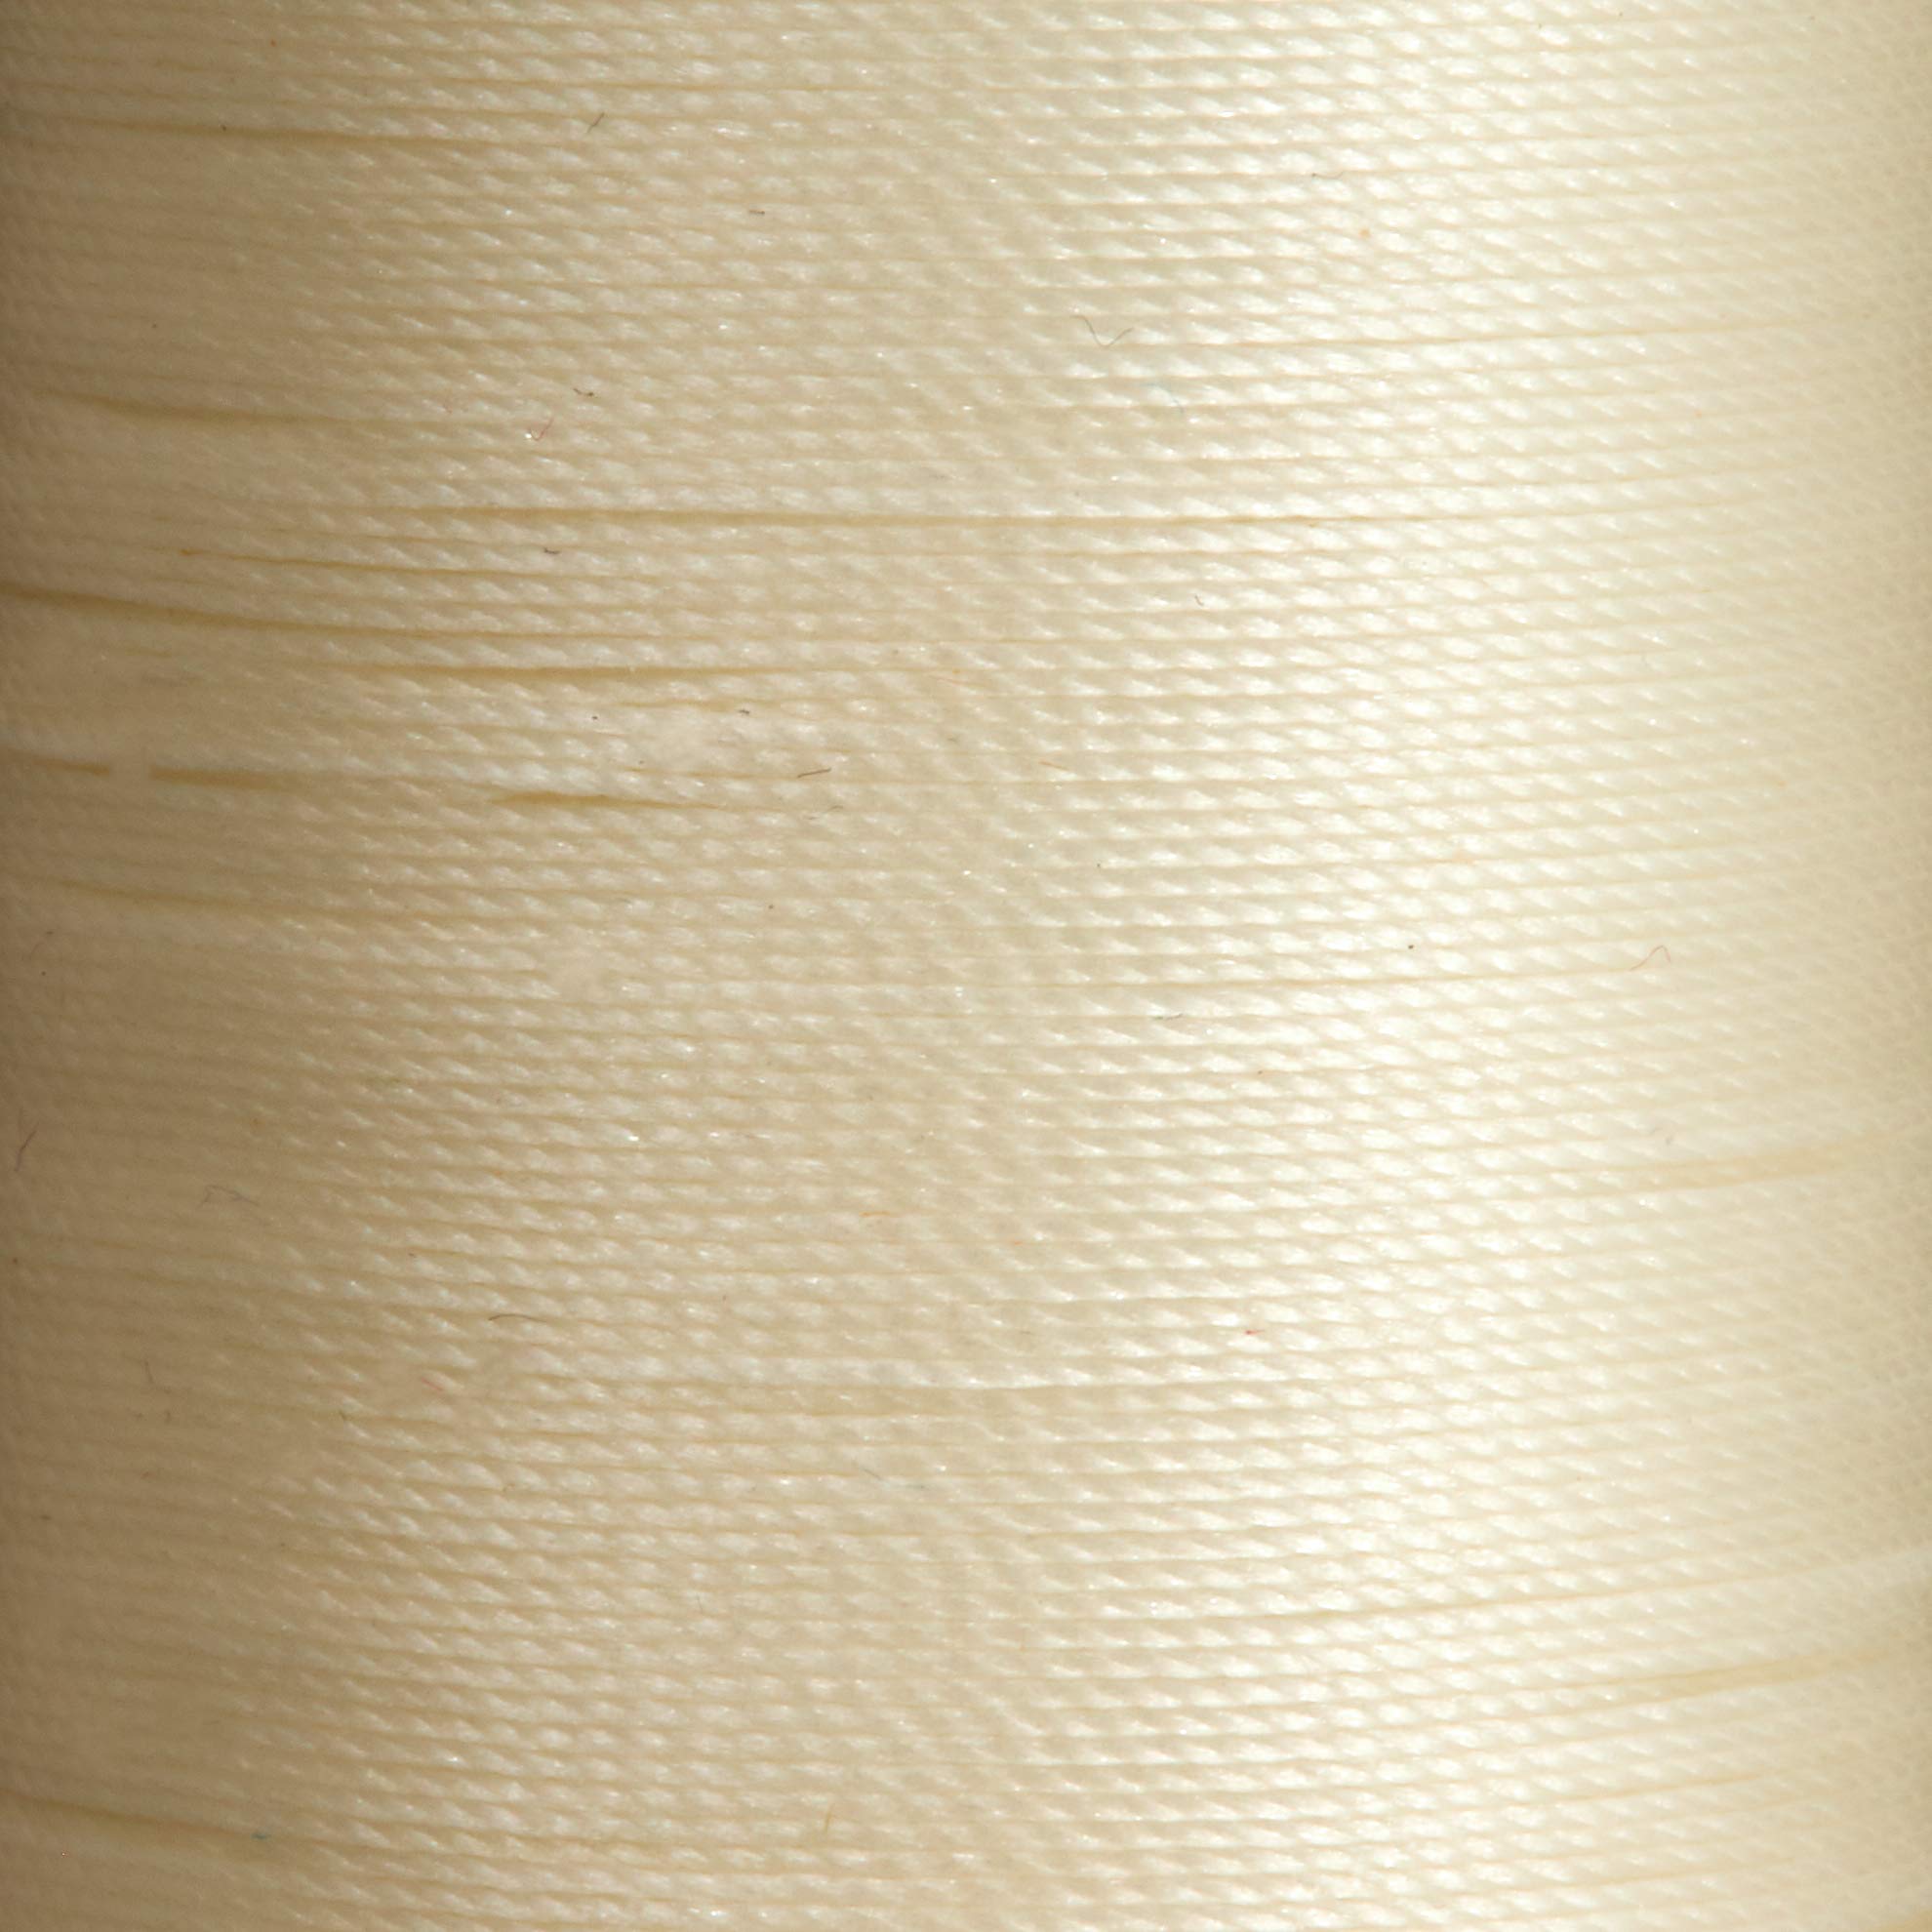 Coats & Clark Specialty Thread Upholstery 150 YD Natural